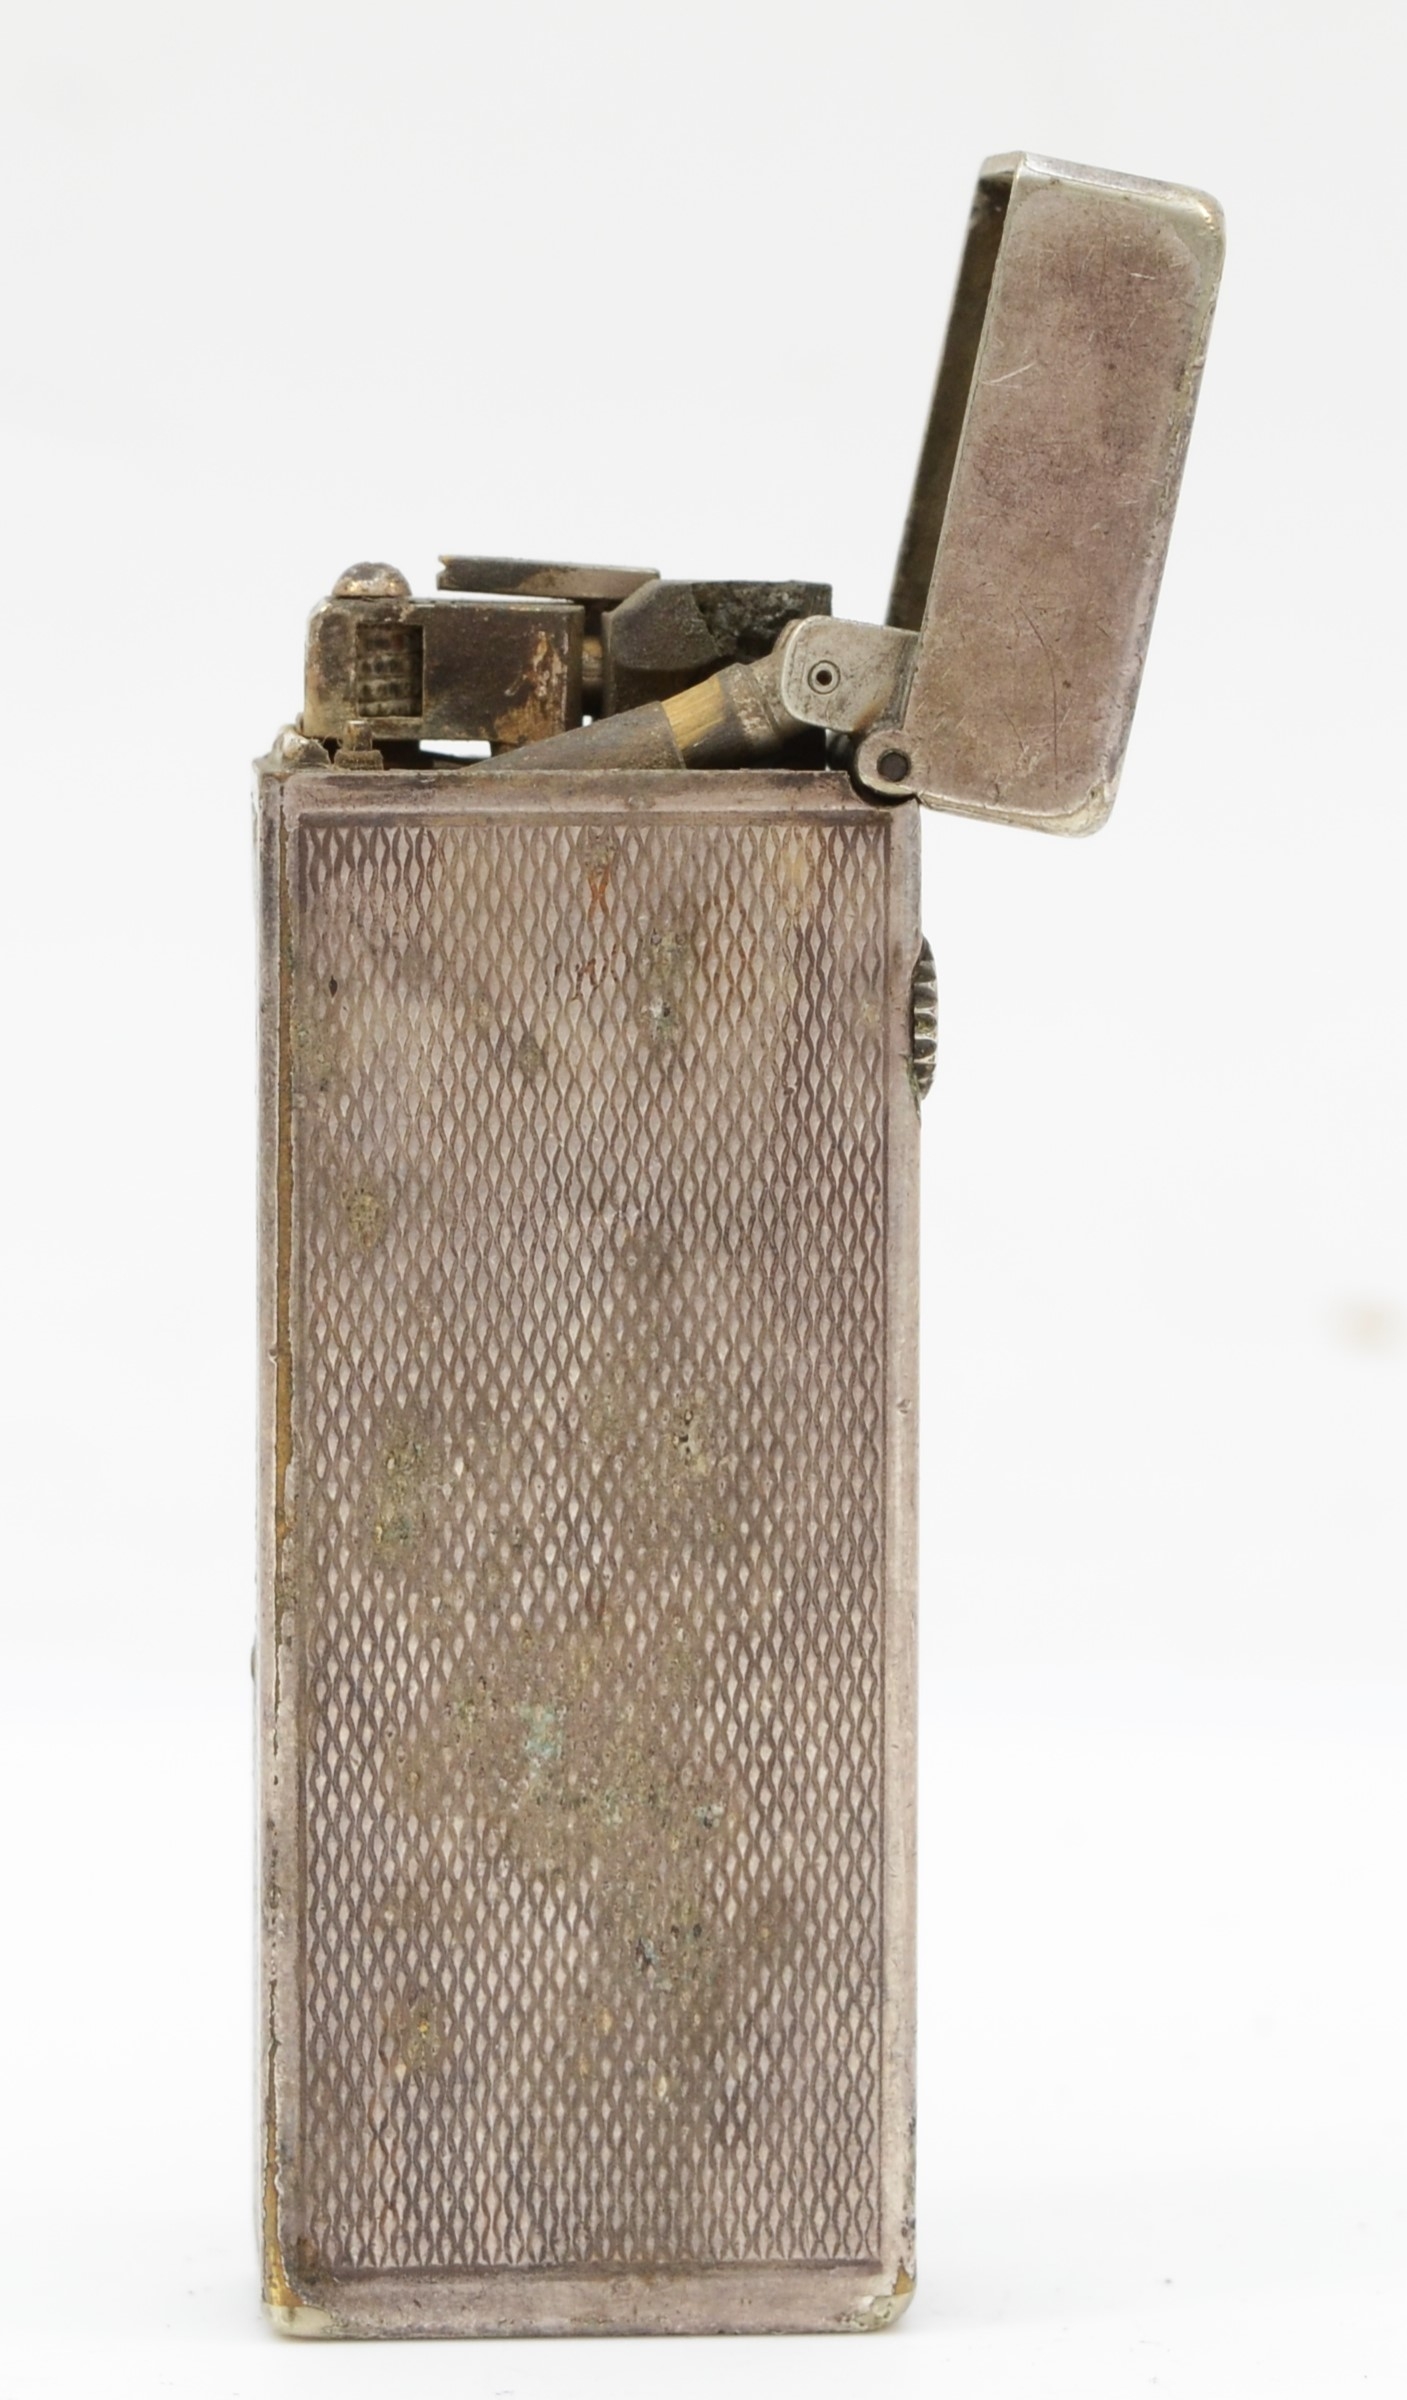 Dunhill, A silver plated gas lighter, 6.5 x 2.5, No 726982. - Image 2 of 3